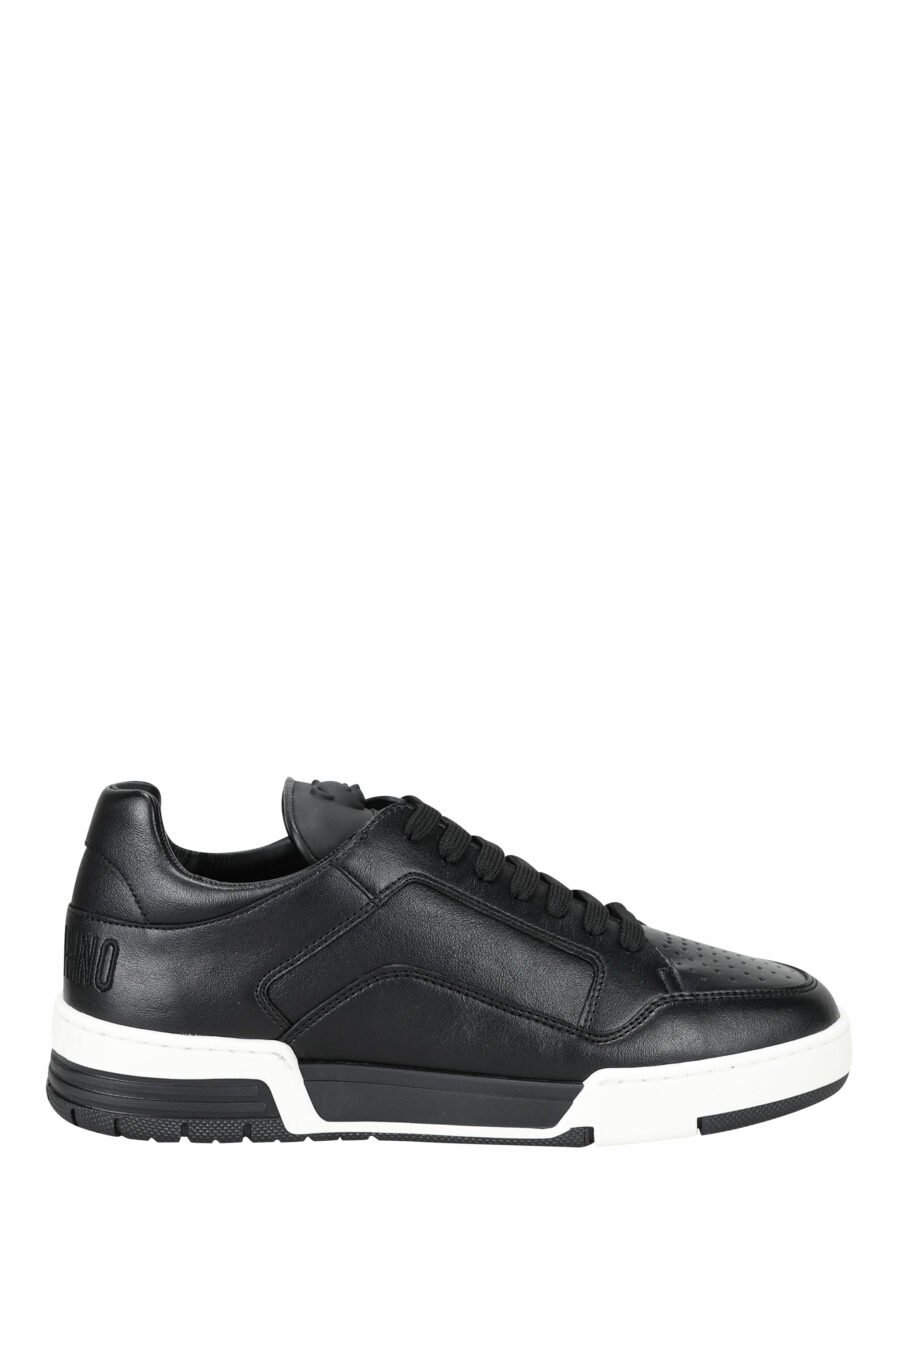 Black leather trainers with white sole and logo - 8054653096394